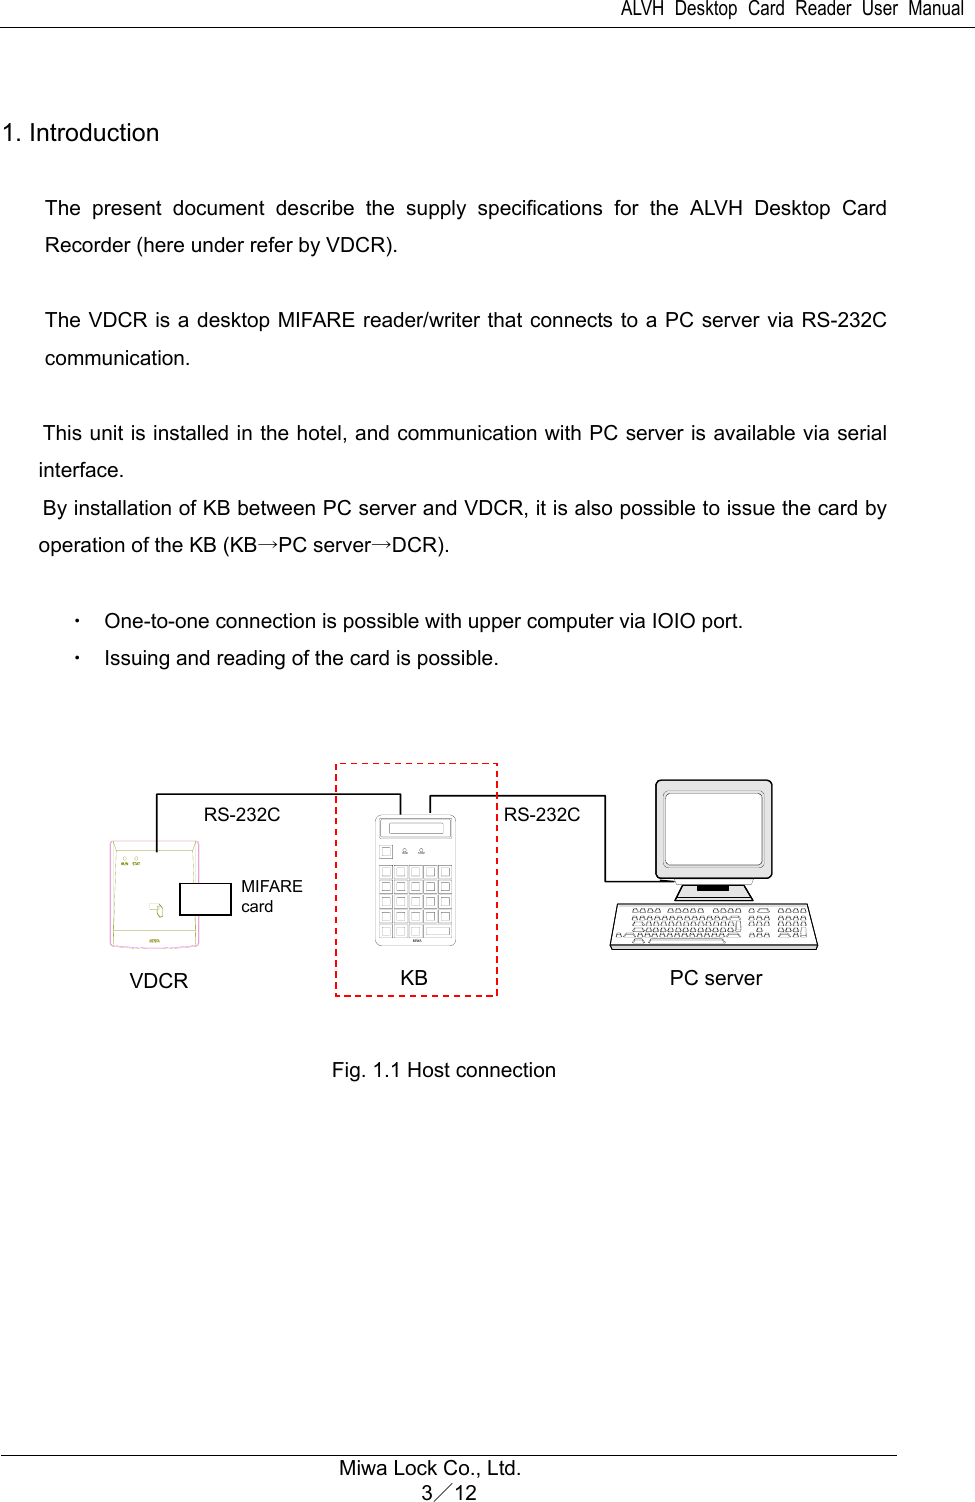 ALVH Desktop Card Reader User Manual  Miwa Lock Co., Ltd. 3／12   1. Introduction    The present document describe the supply specifications for the ALVH Desktop Card Recorder (here under refer by VDCR).  The VDCR is a desktop MIFARE reader/writer that connects to a PC server via RS-232C communication.  This unit is installed in the hotel, and communication with PC server is available via serial interface. By installation of KB between PC server and VDCR, it is also possible to issue the card by operation of the KB (KB→PC server→DCR).  ・  One-to-one connection is possible with upper computer via IOIO port. ・  Issuing and reading of the card is possible.            Fig. 1.1 Host connection   RUN STOPMIWAVDCR  KB  PC server RS-232C MIFARE card RS-232C 